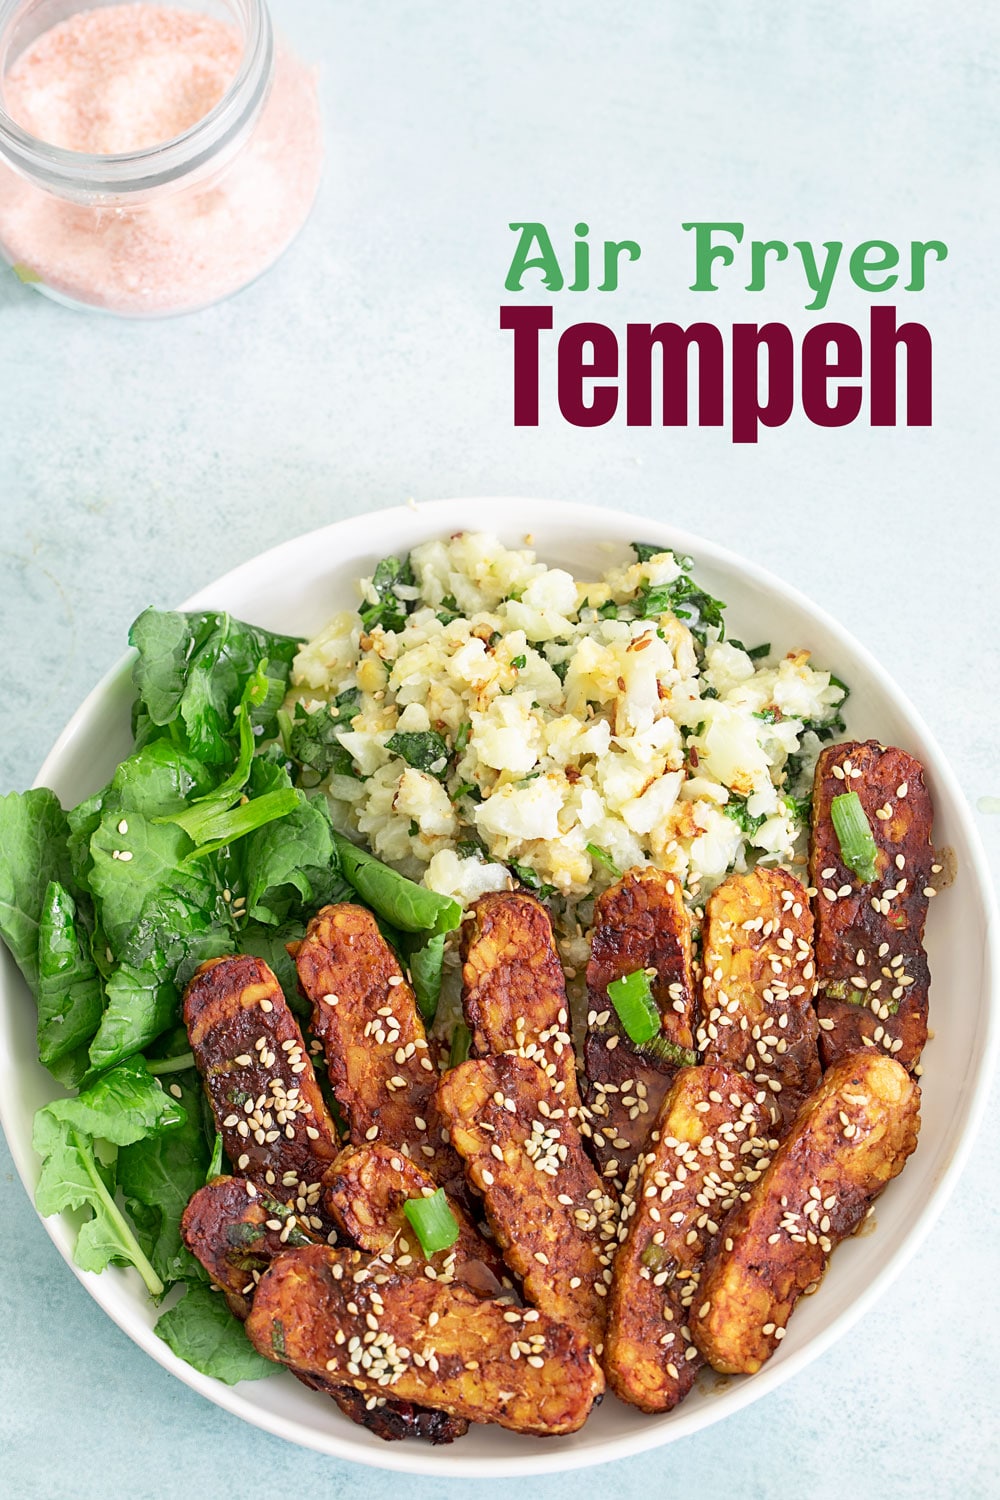 Top view of a vegan buddha bowl with air fryer tempeh, greens and rice. Easy healthy recipes